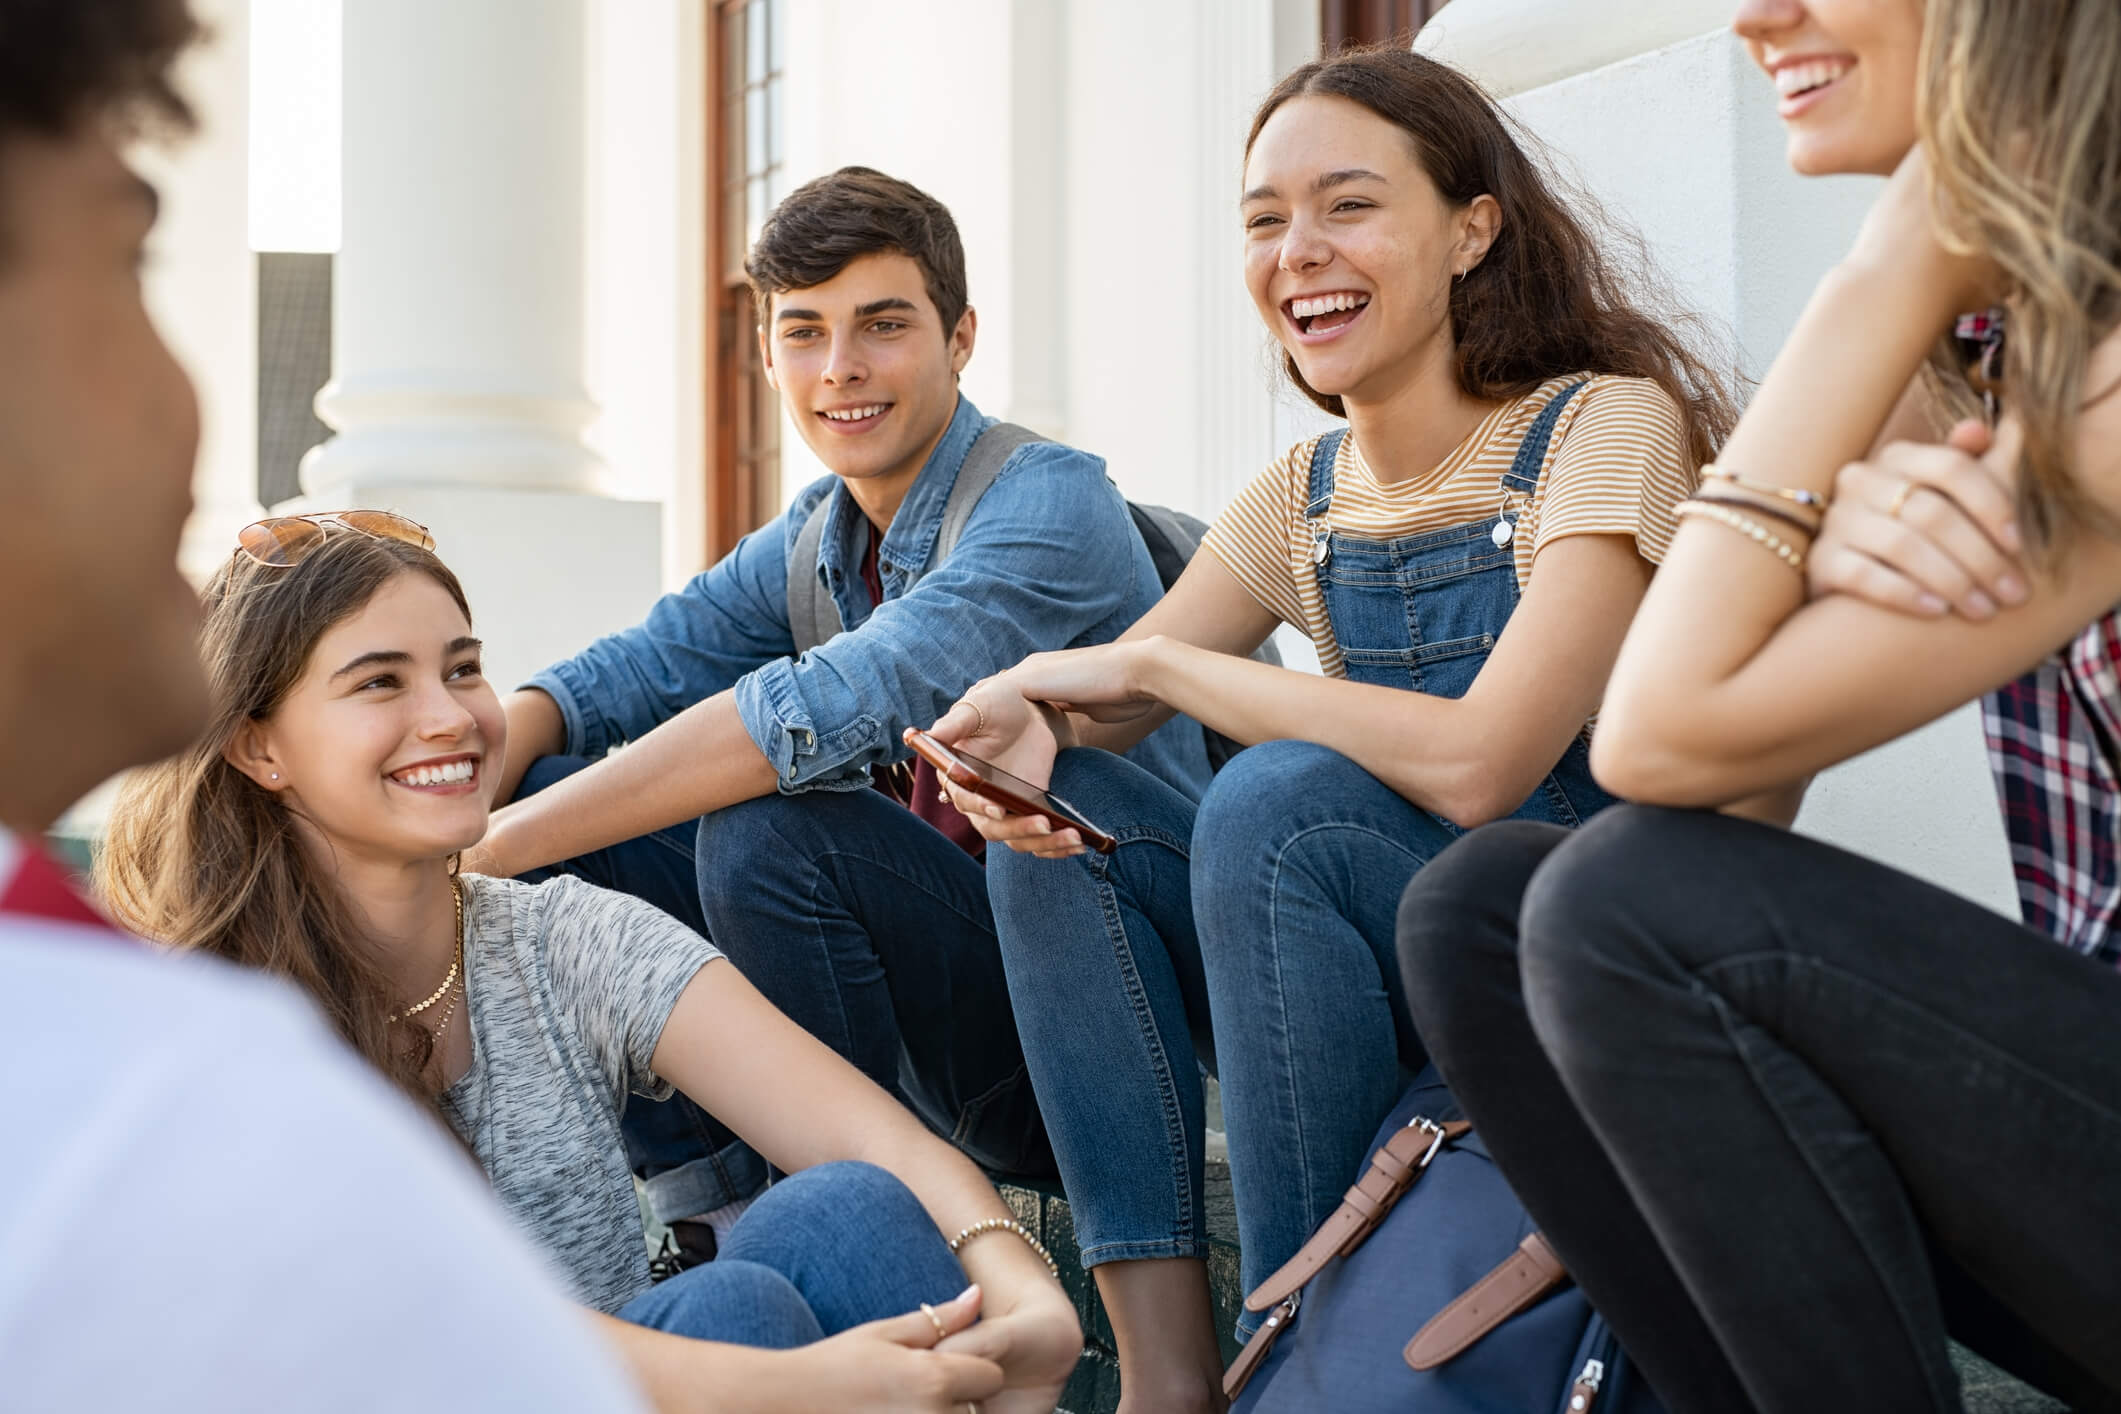 group of young people sitting and laughing